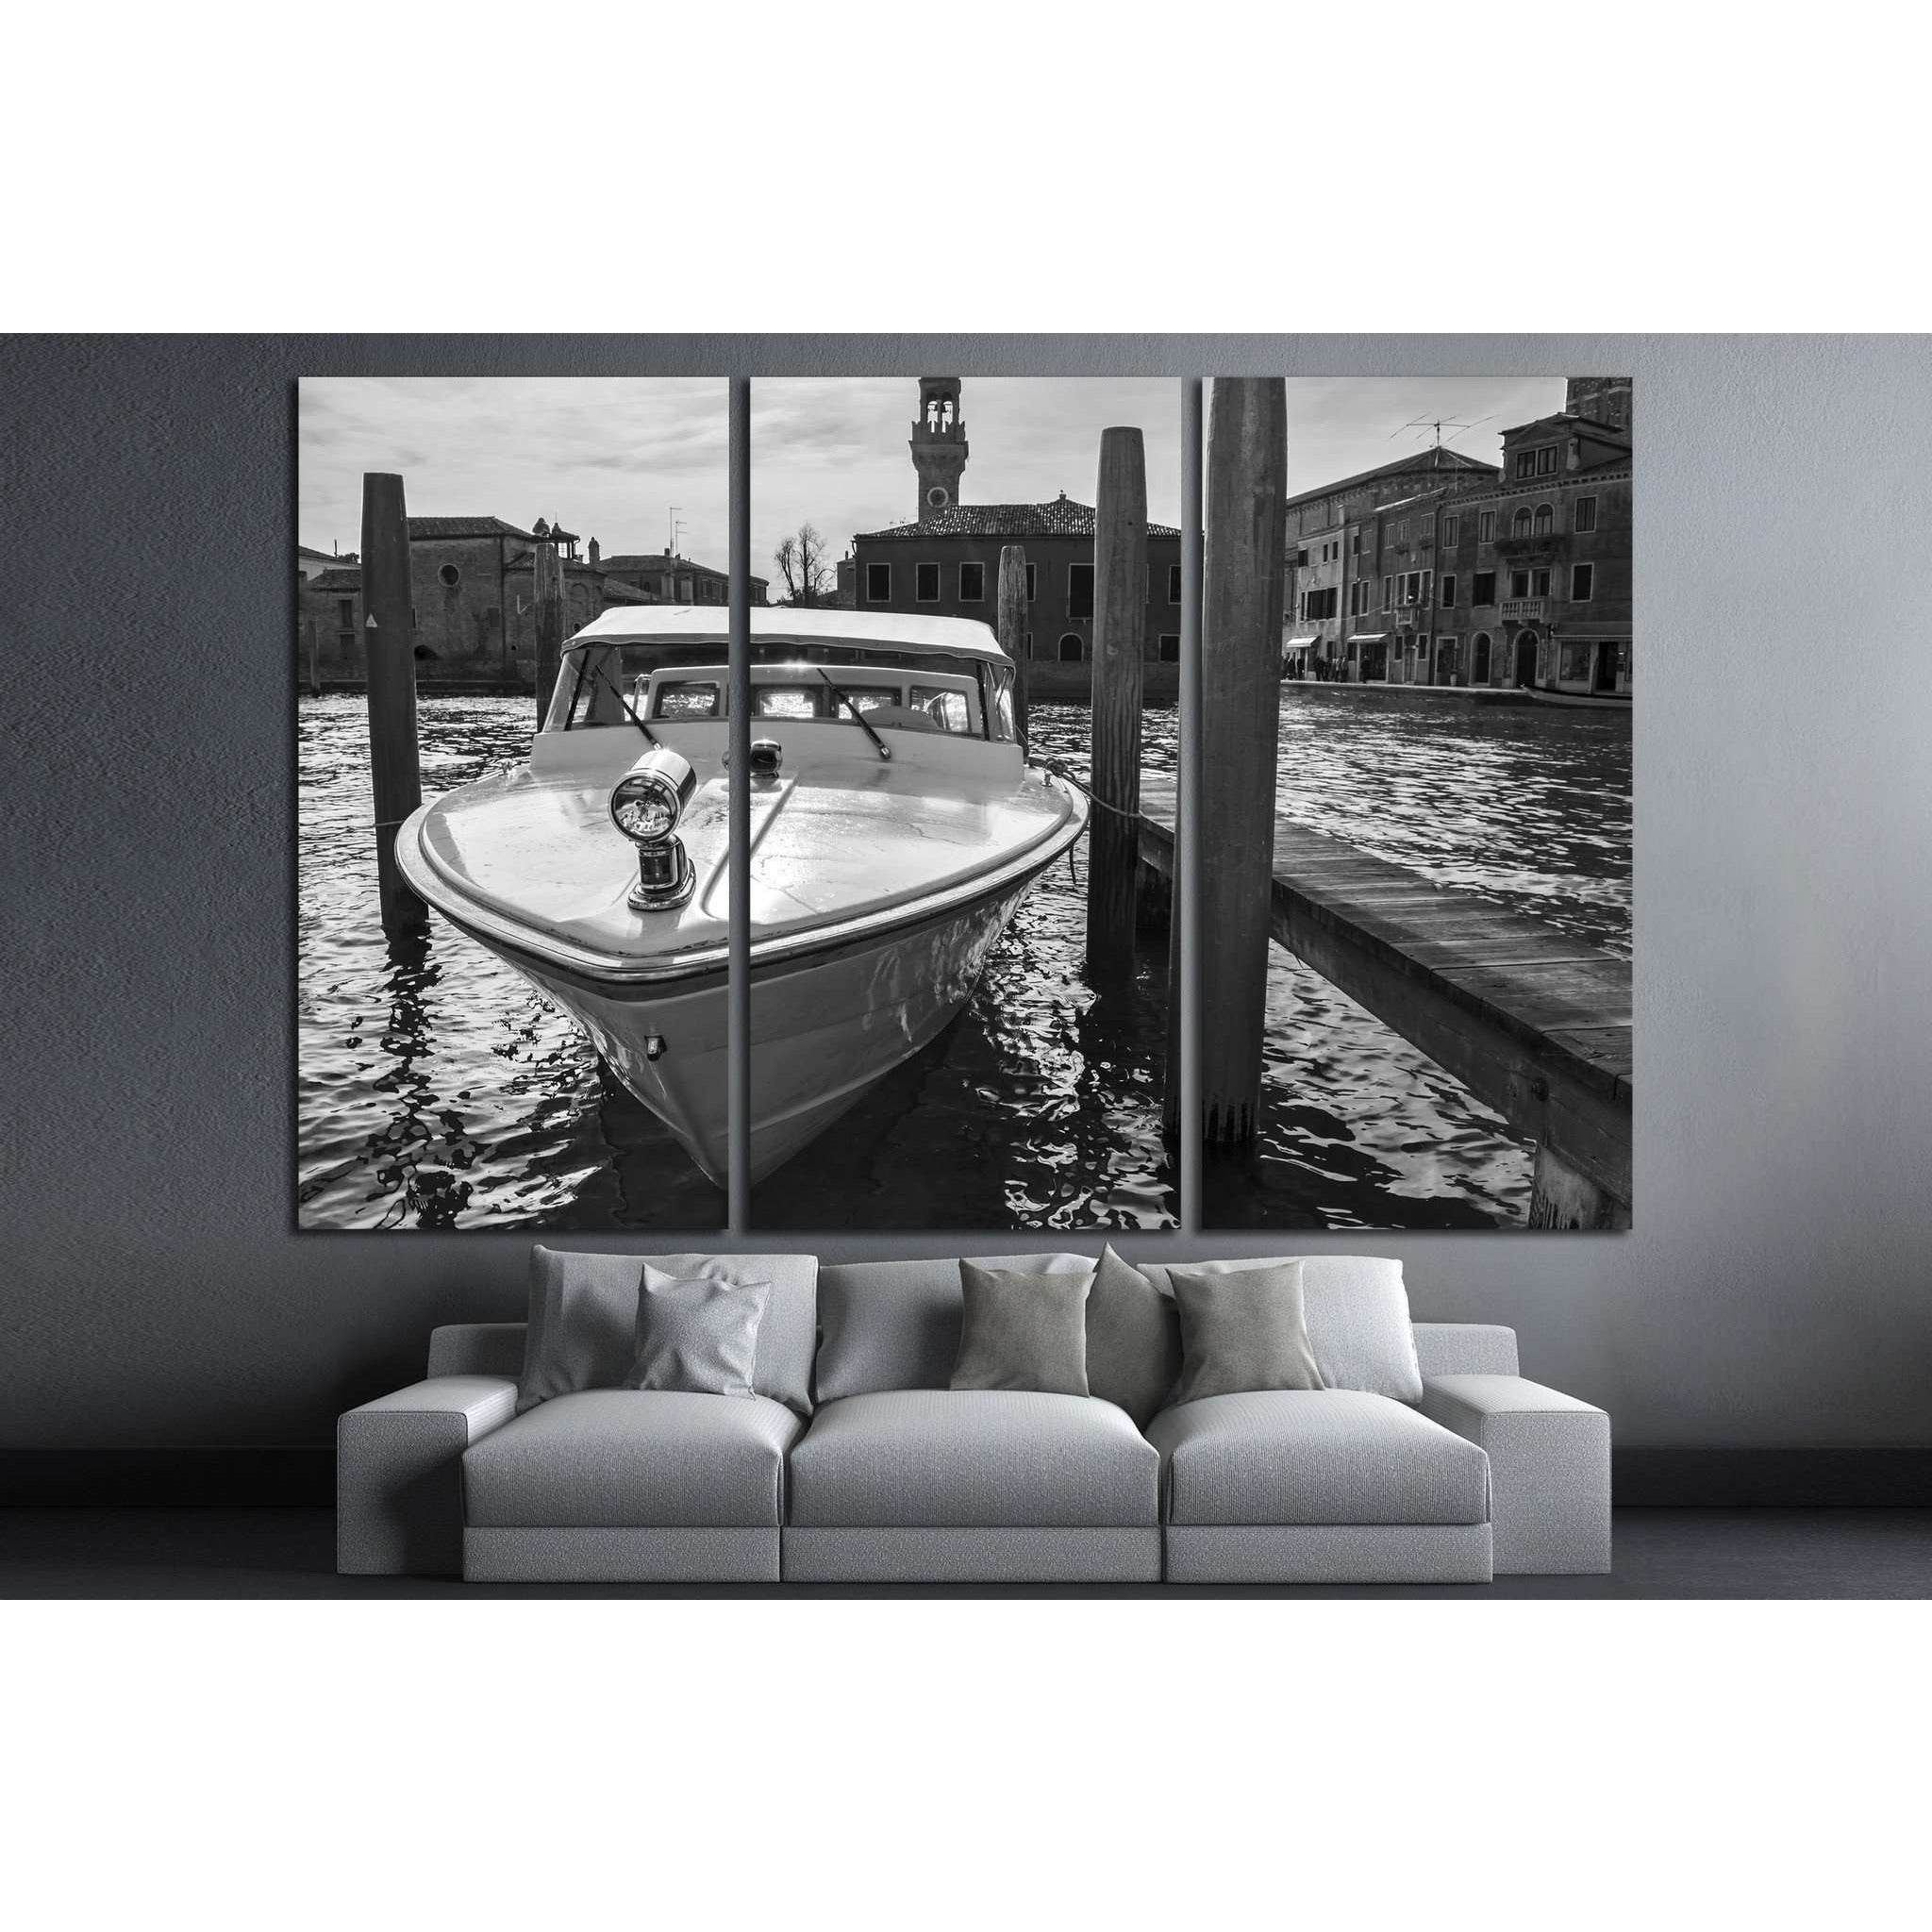 berthed boat on canal in Venice in a sunny day №1414 Ready to Hang Canvas Print